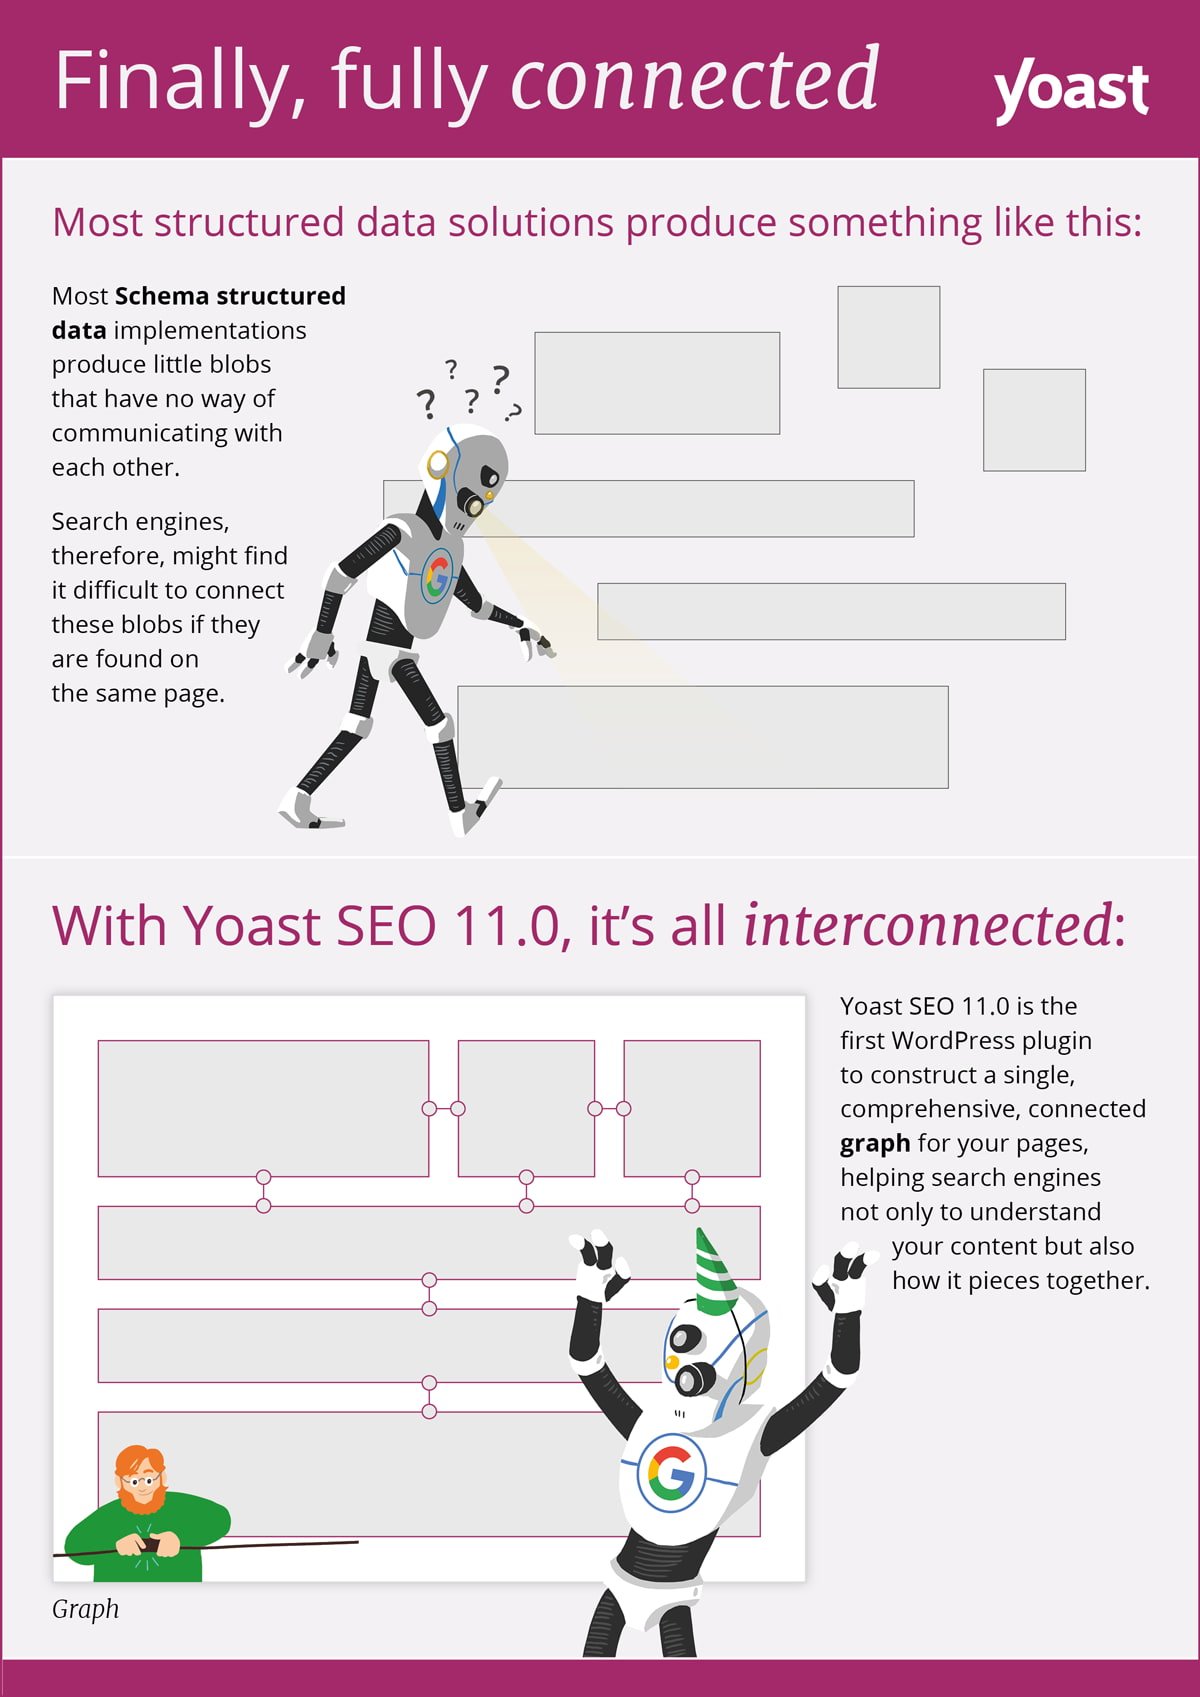 An infographic showing how Yoast SEO builds a graph to connect structured data